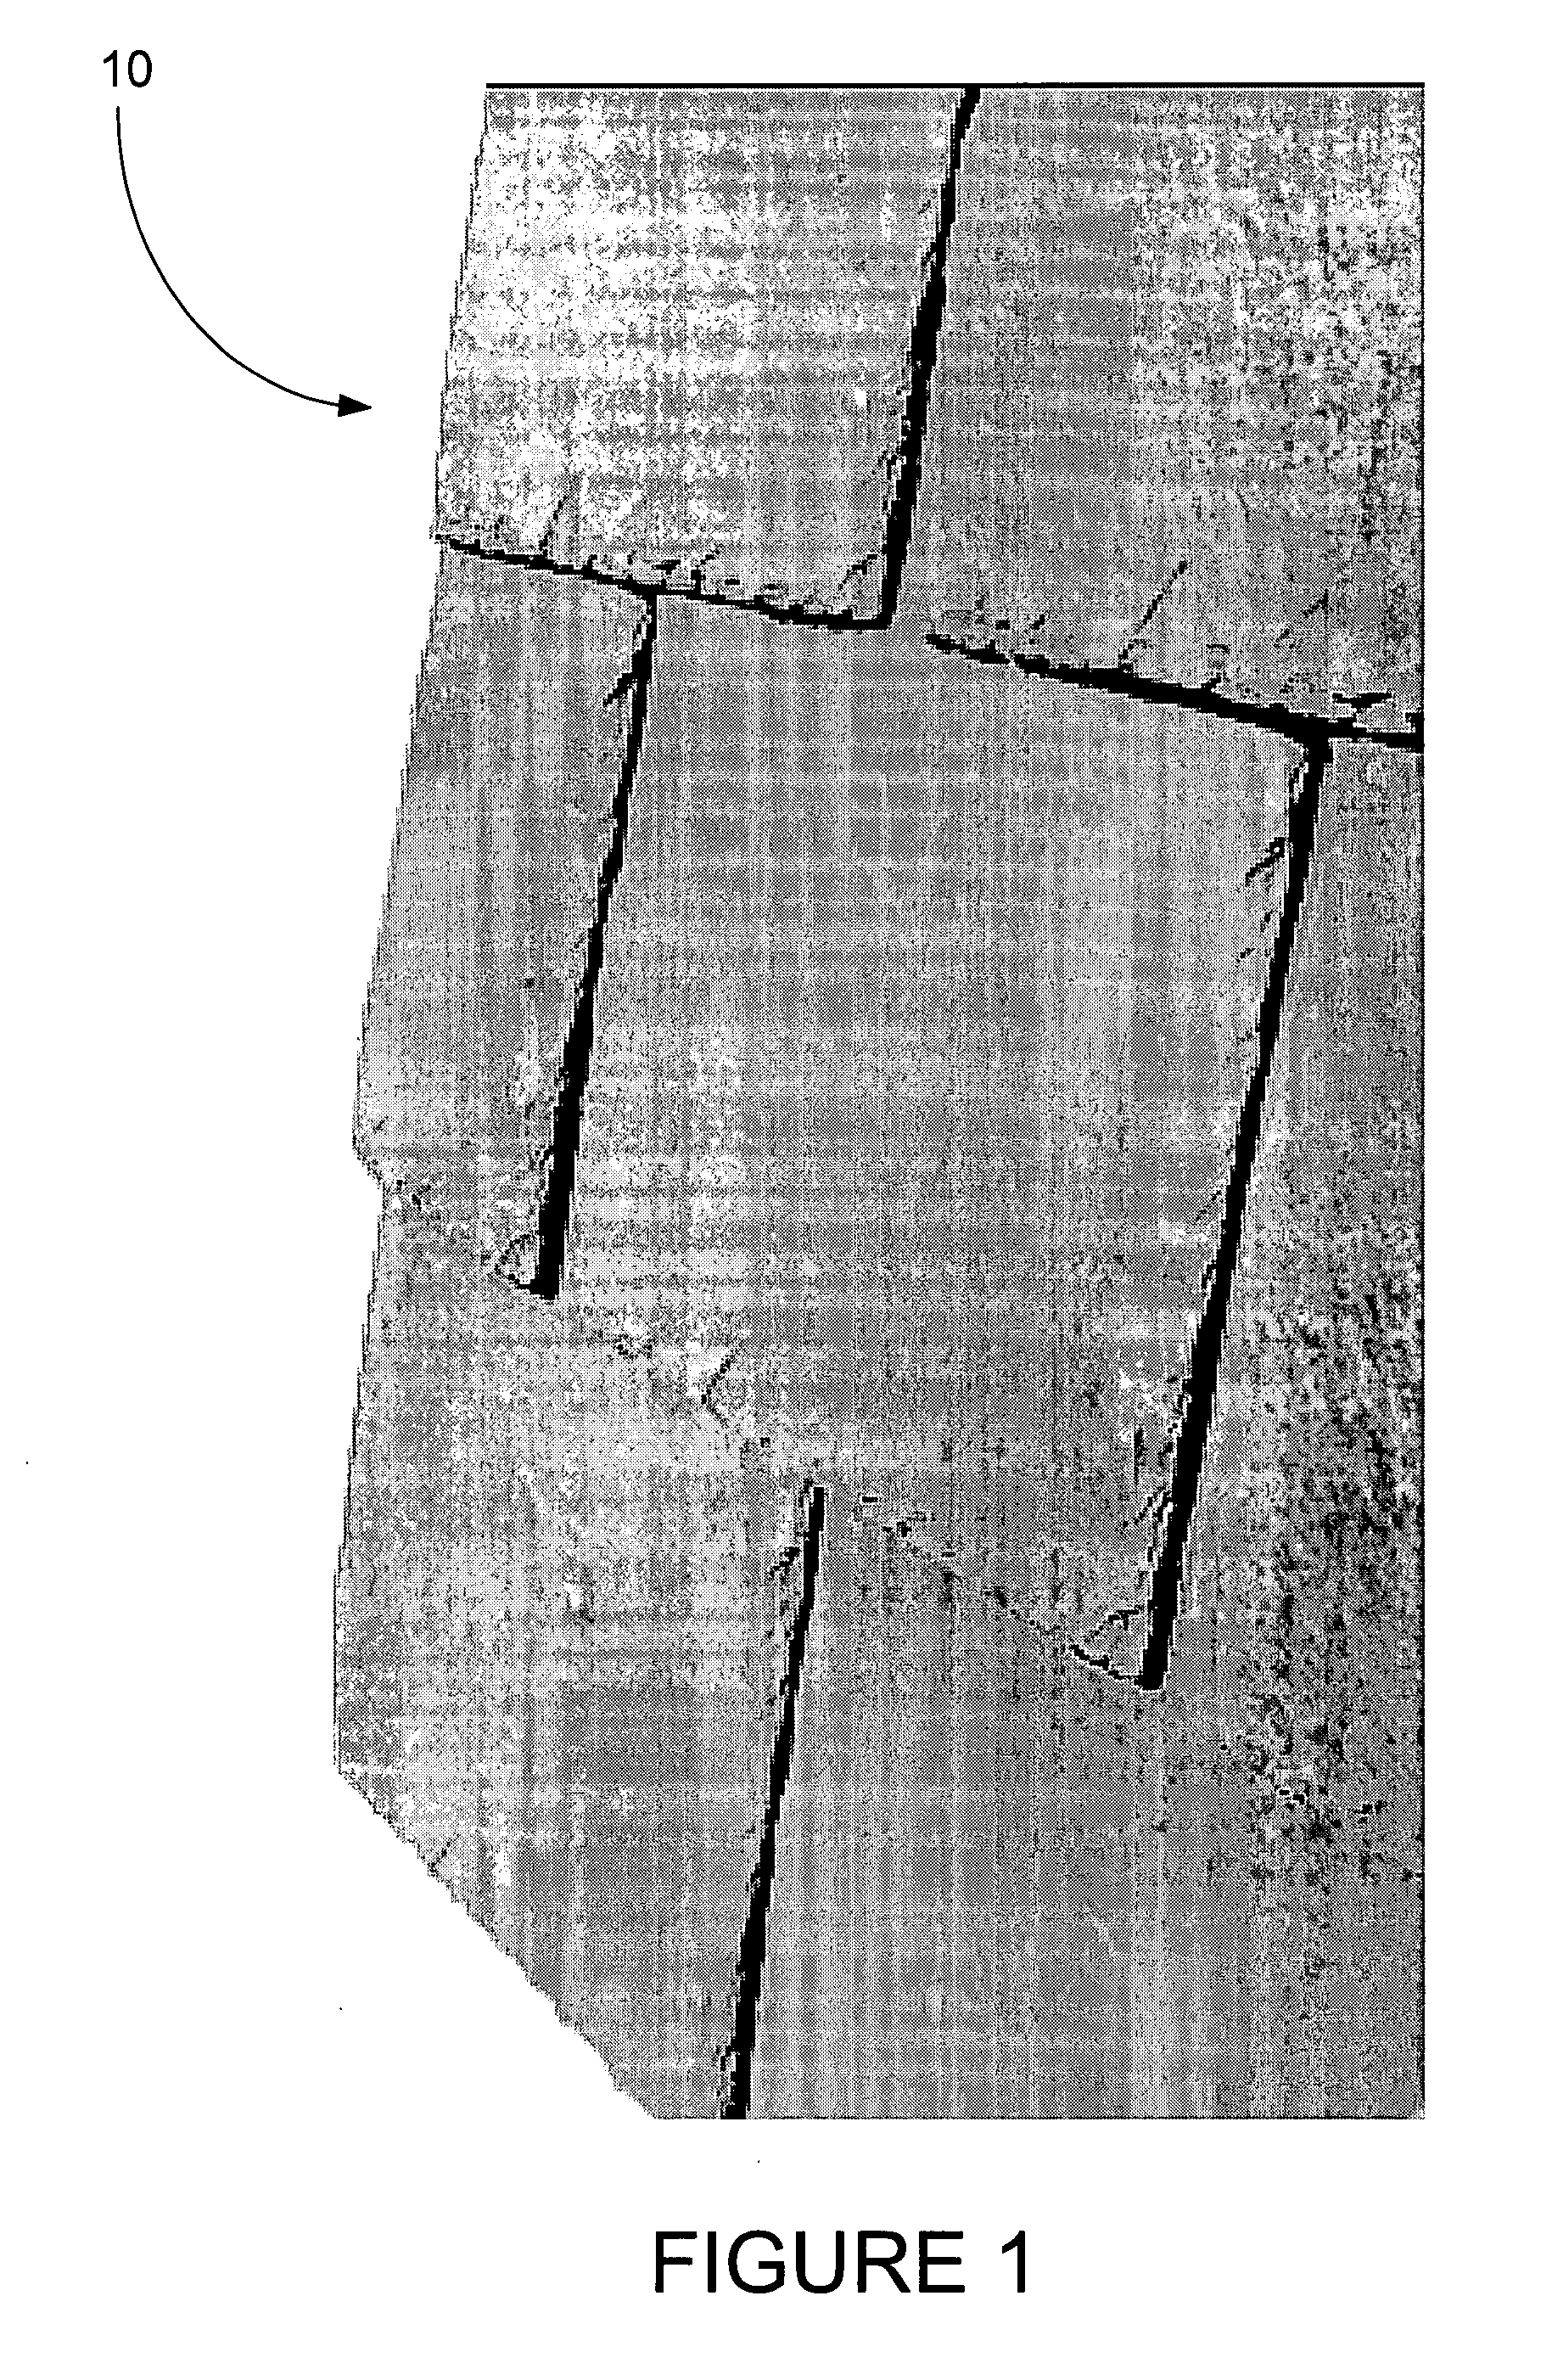 Method of fabrication for synthetic roofing and siding material